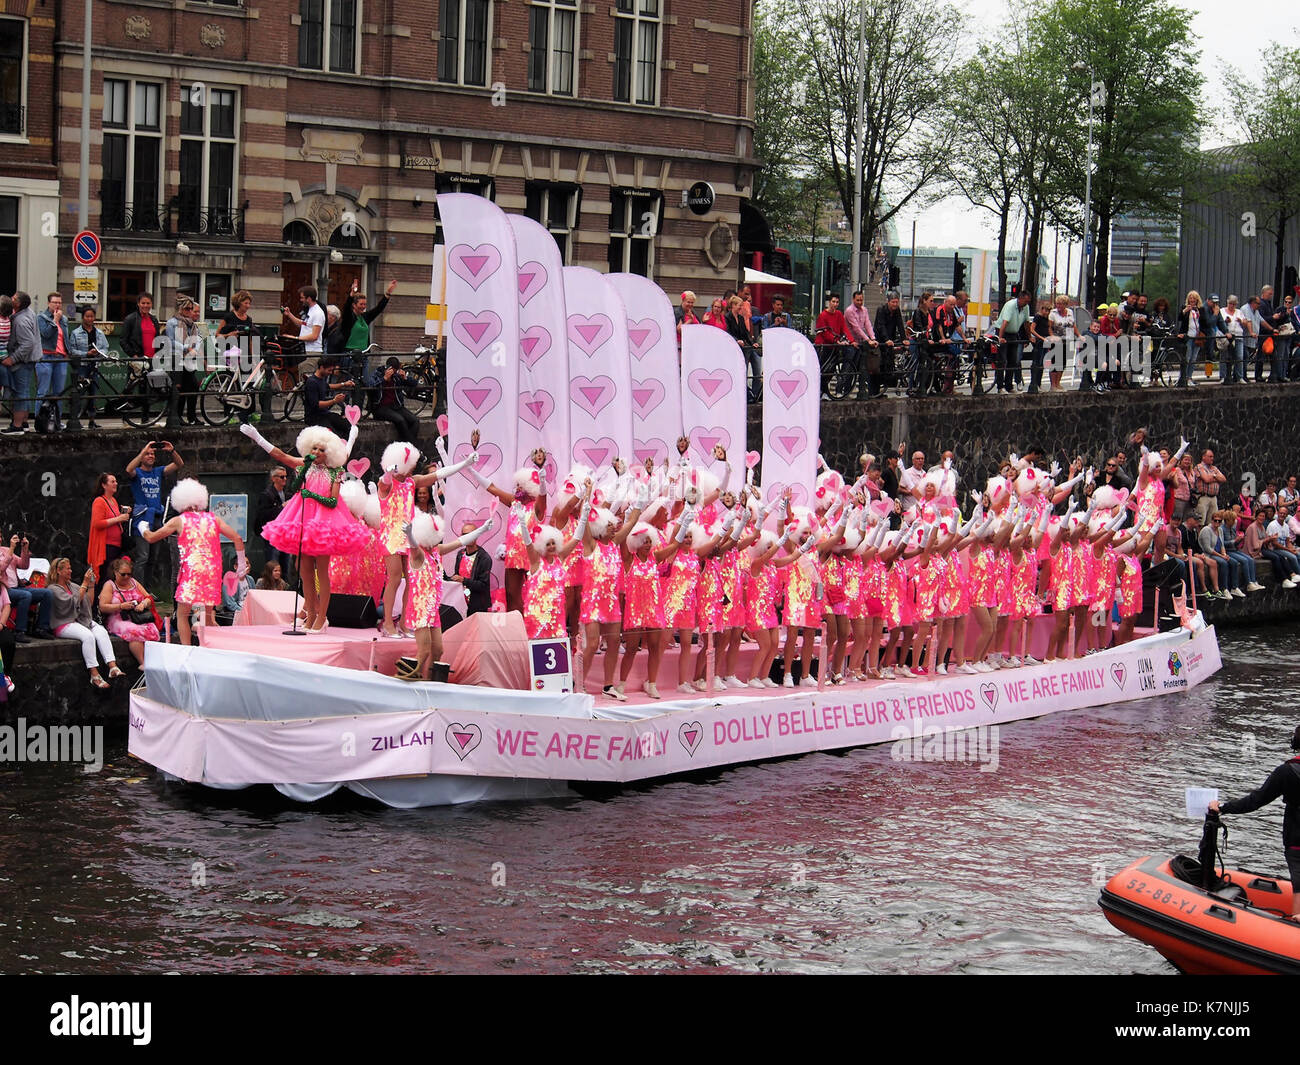 Imbarcazione 3 Dolly Bellefleur & Friends, Canal Parade Amsterdam 2017 foto 1 Foto Stock